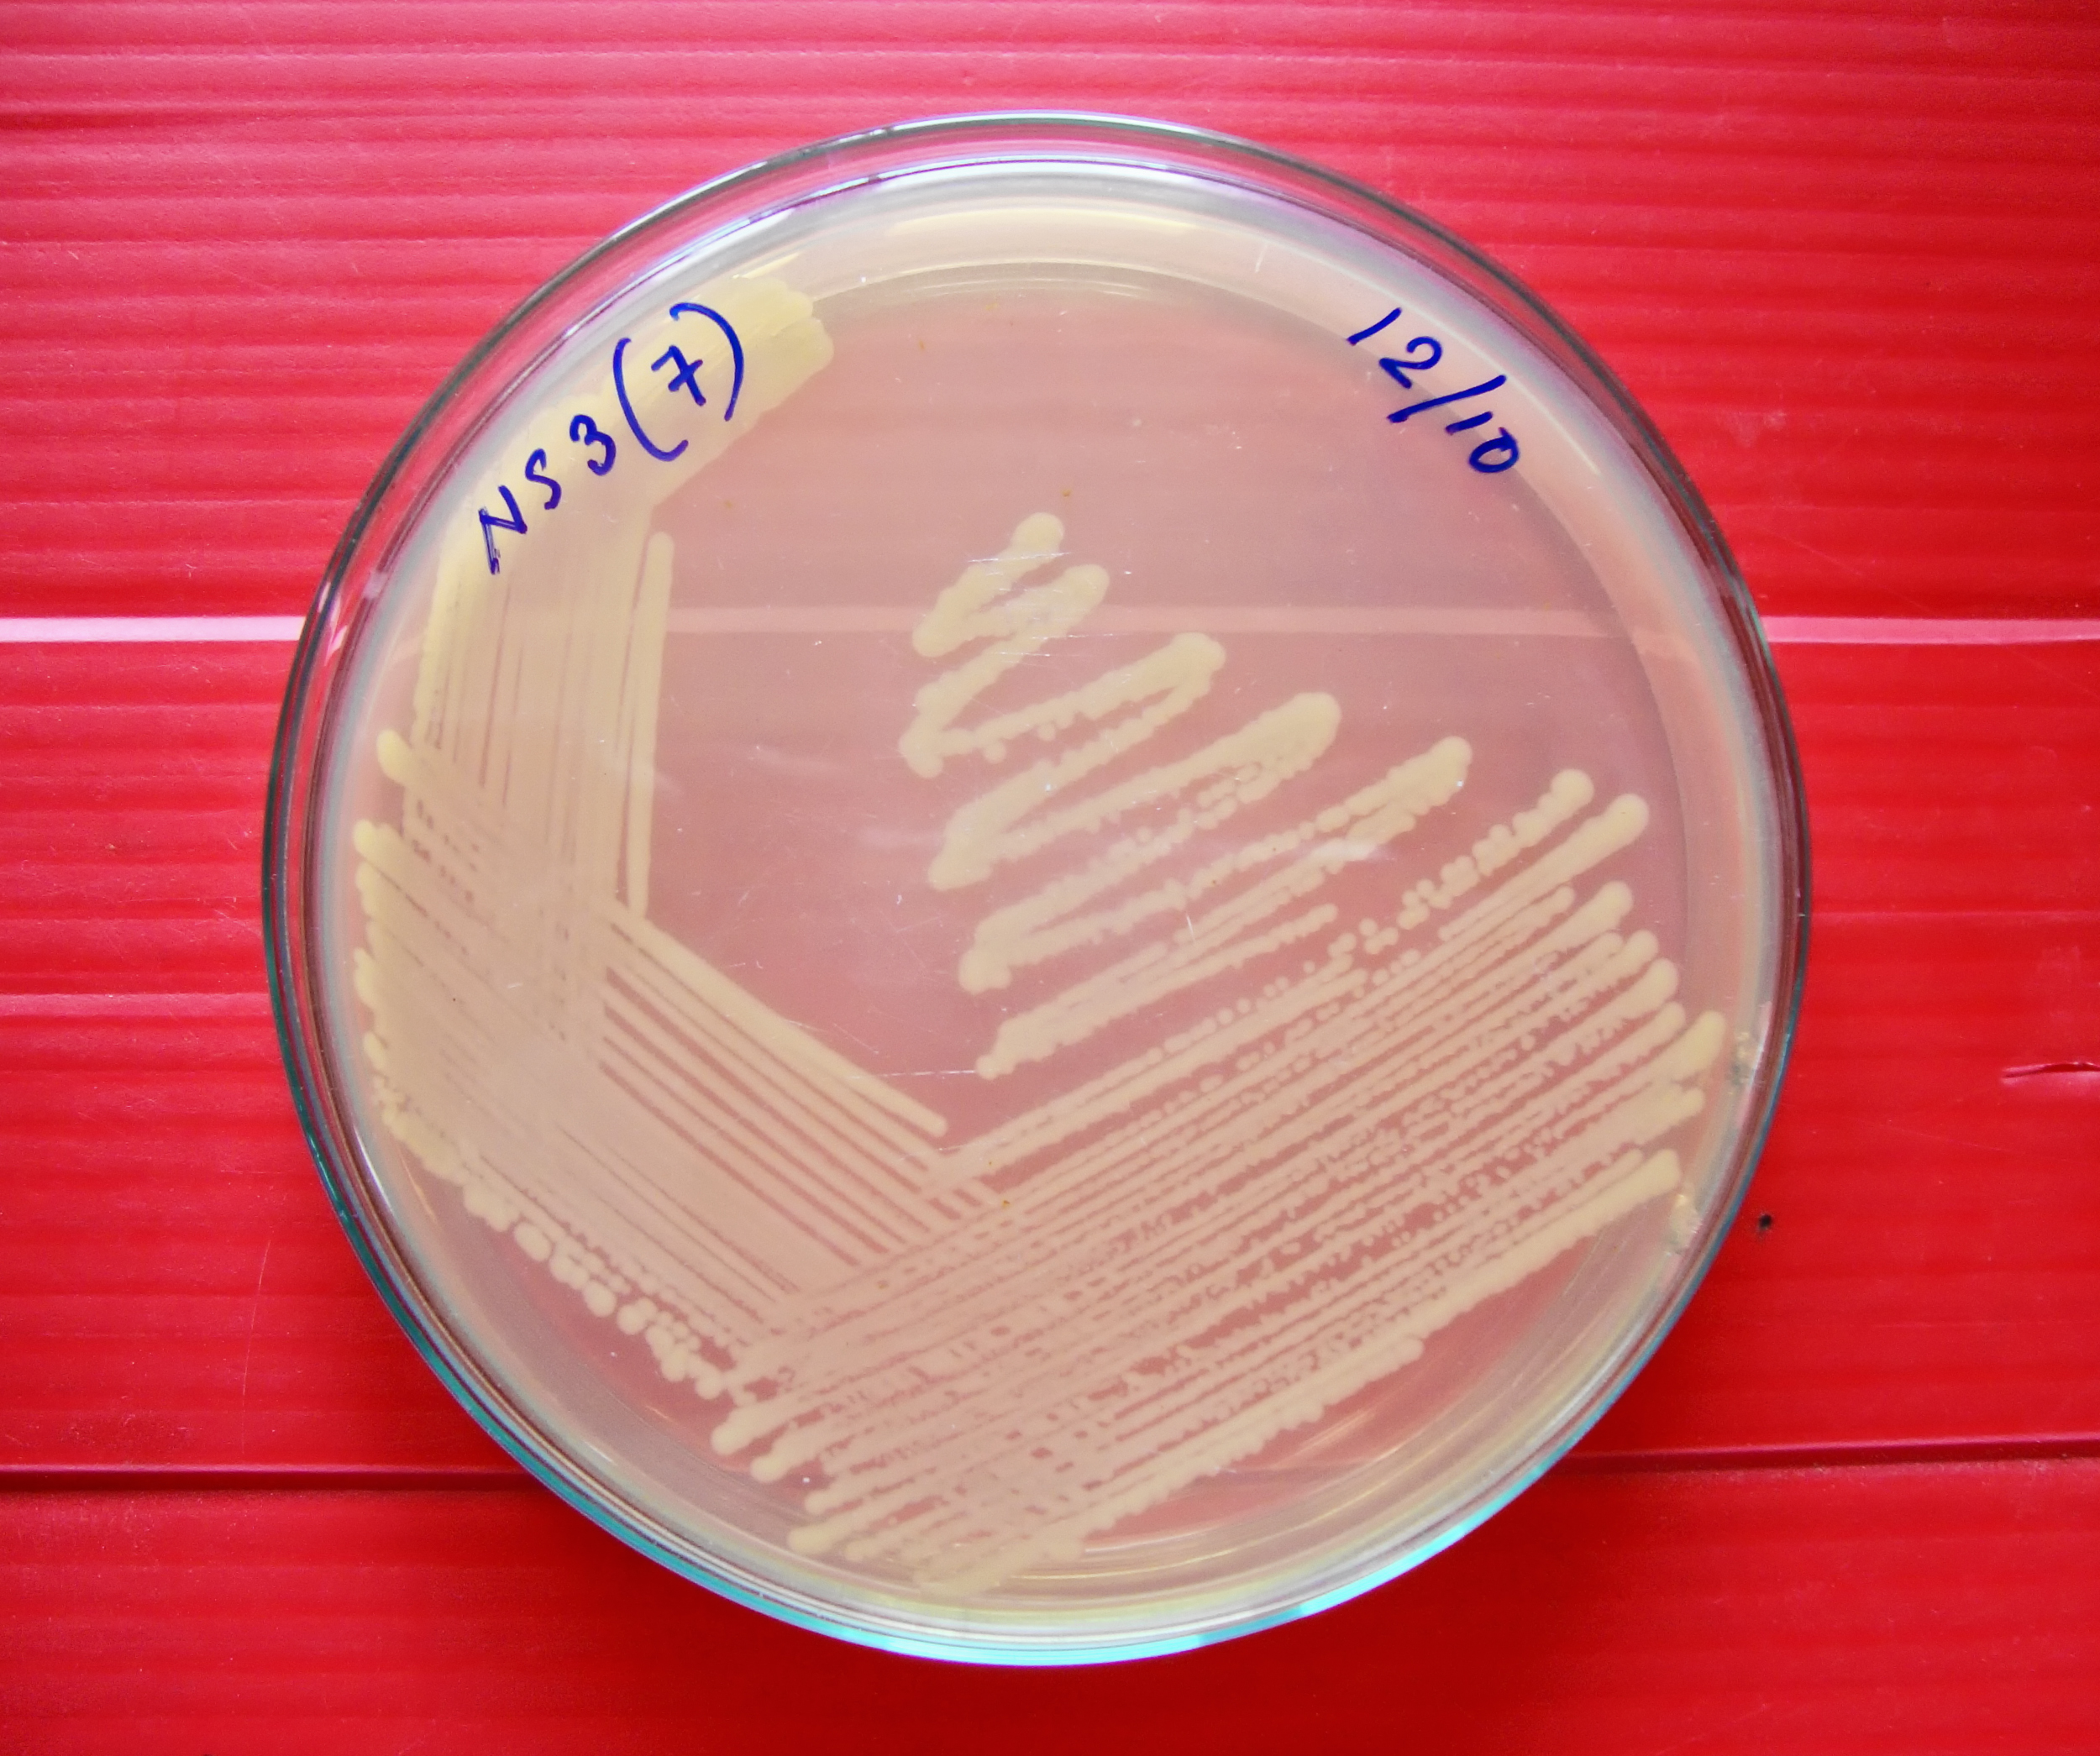 culturing and identifying the ''Salmonella enterica Typhi'' bacterium